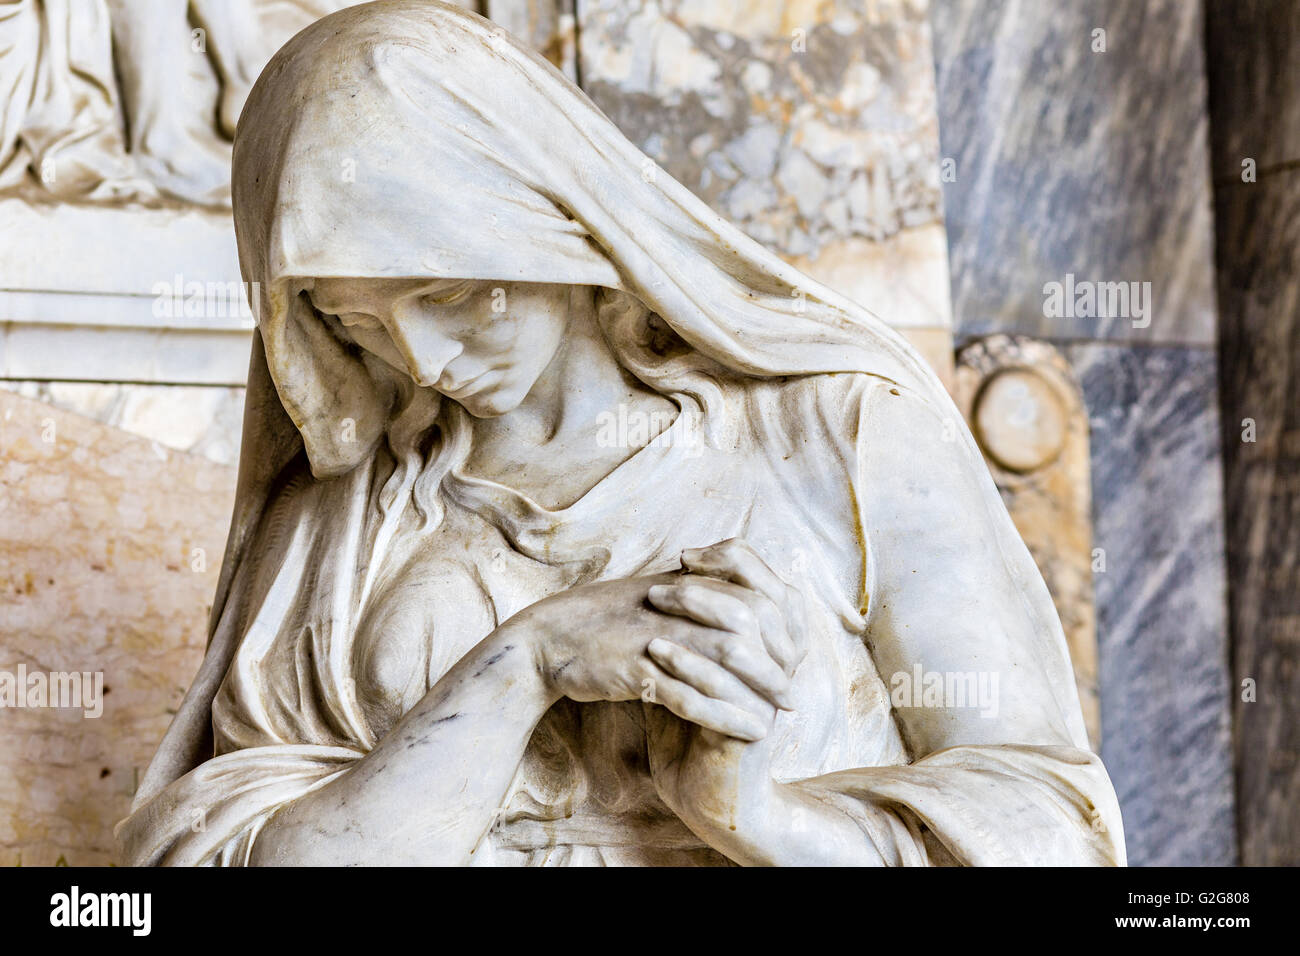 Details of statue of grieving woman with her hands clasped in prayer Stock Photo